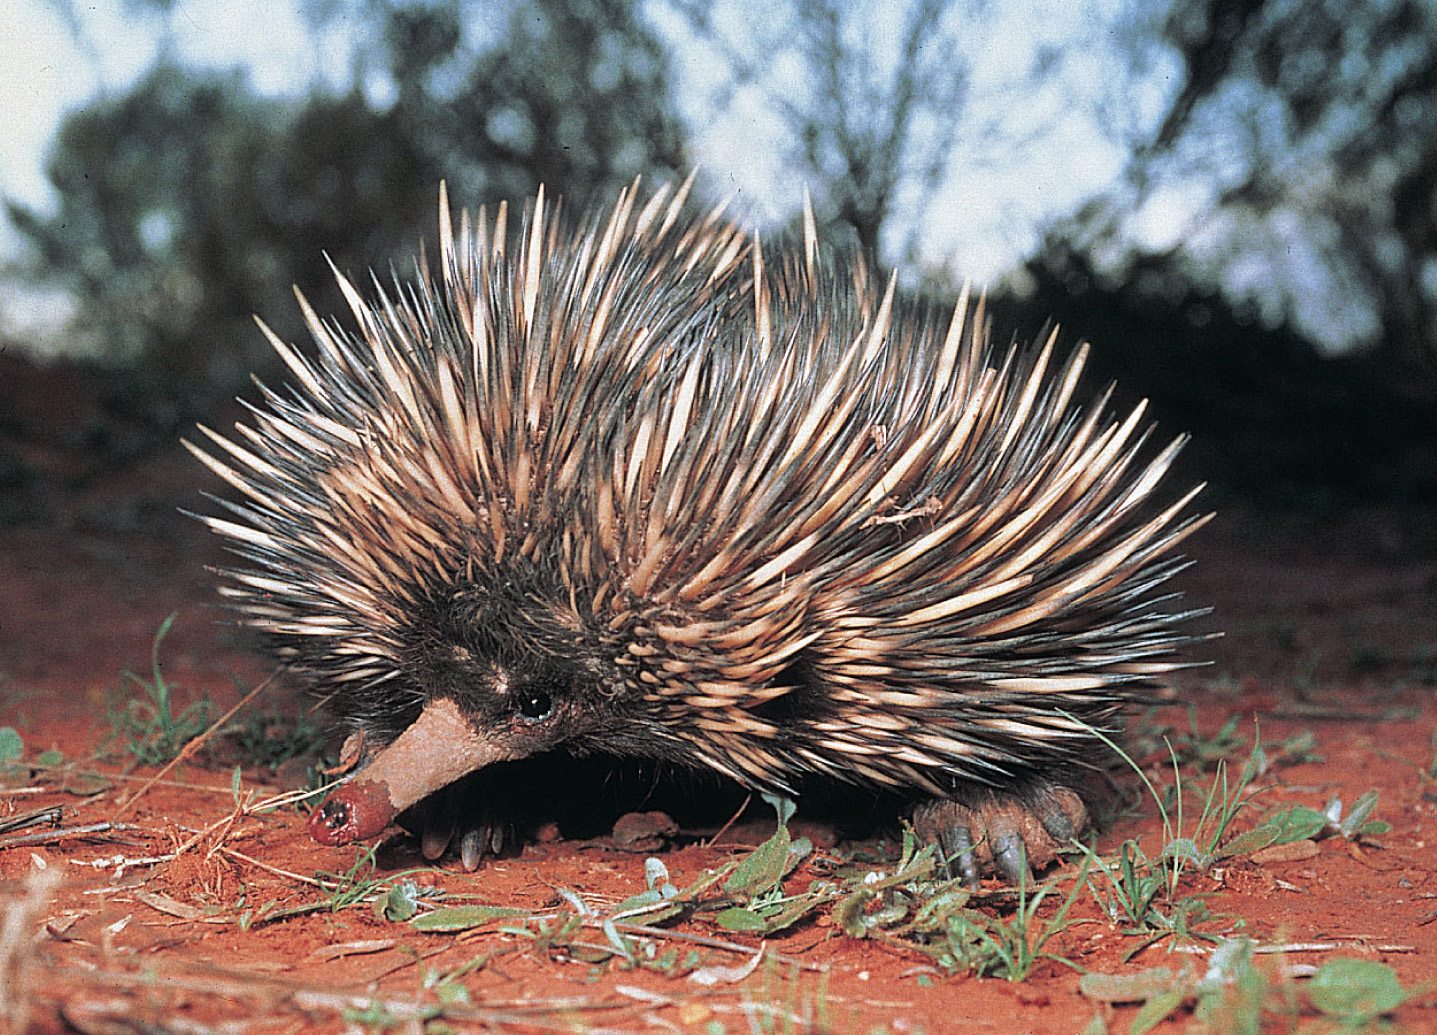 Australia's spiny anteater, one of only three modern species of monotremes